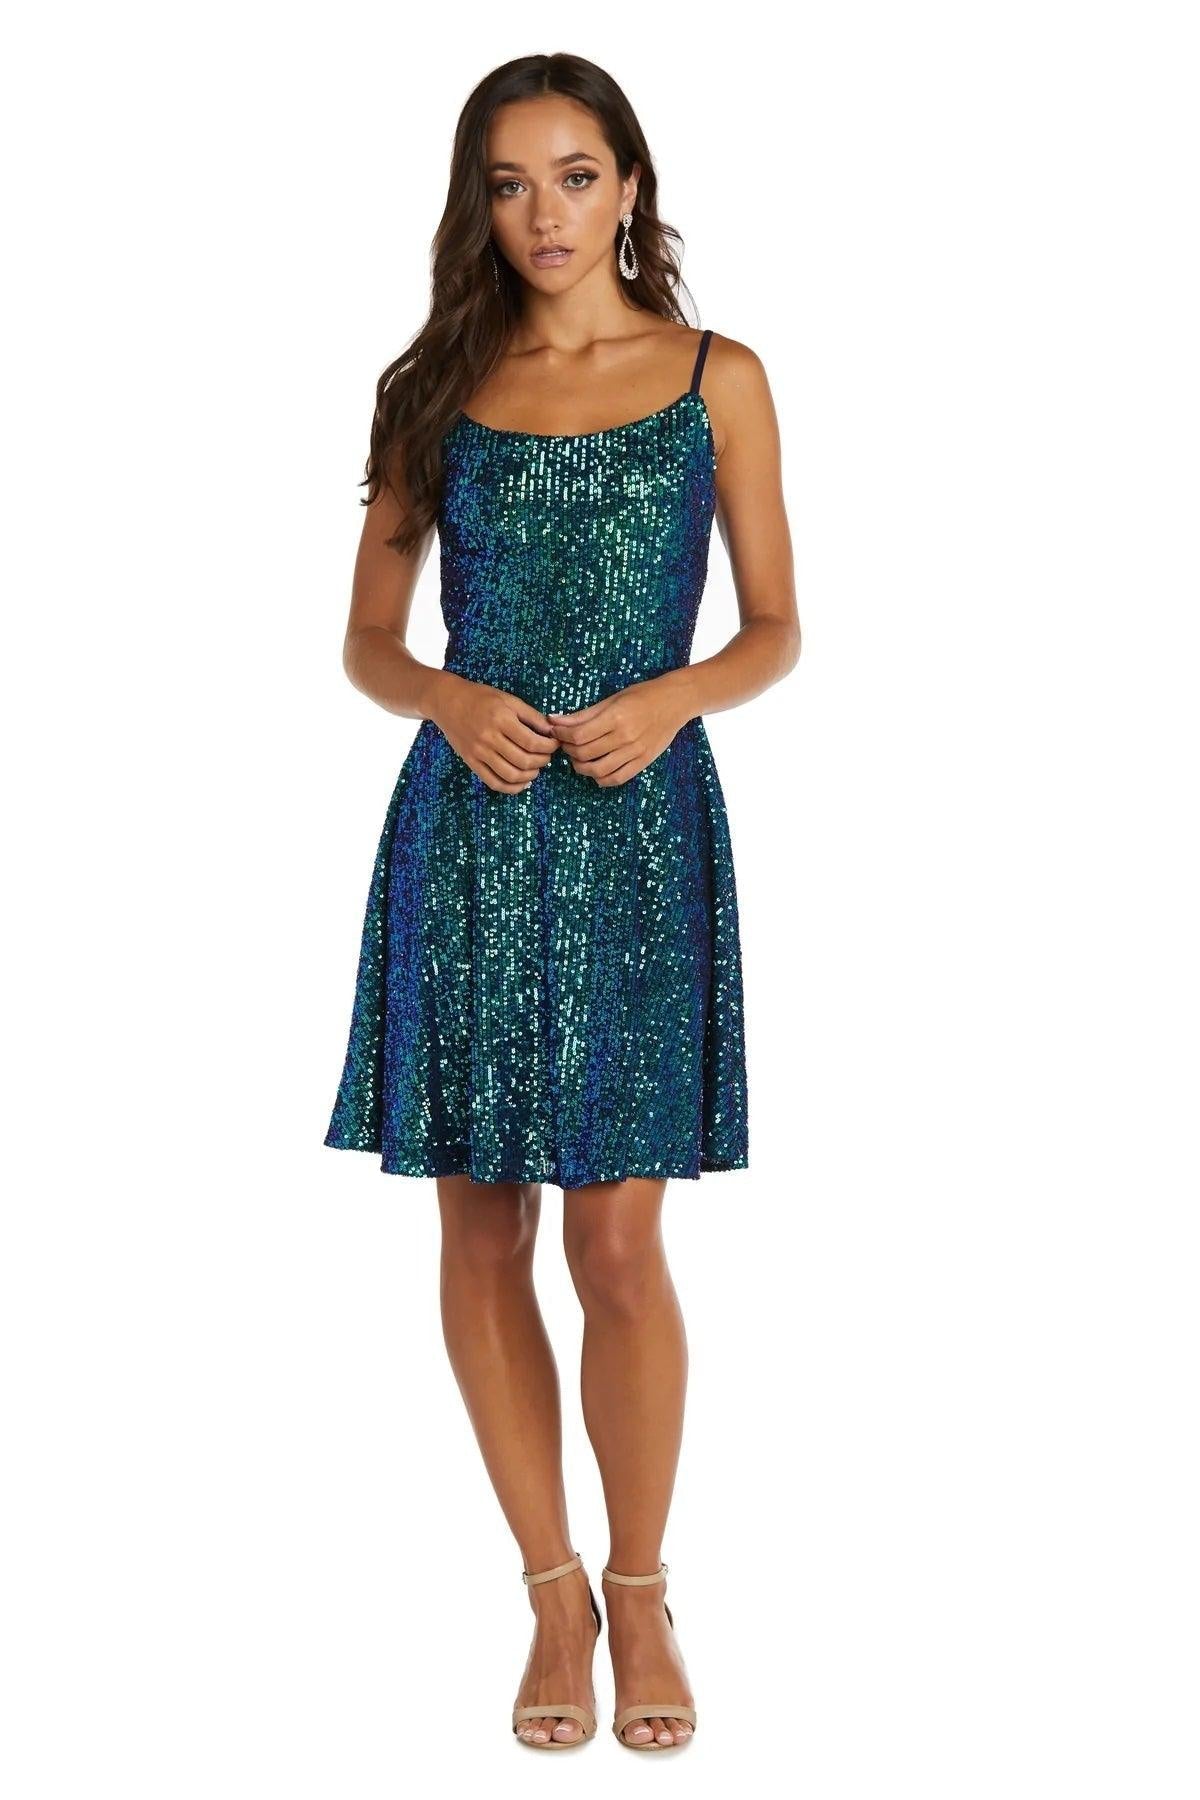 Sleeveless Homecoming Short Prom Dress Sale - The Dress Outlet